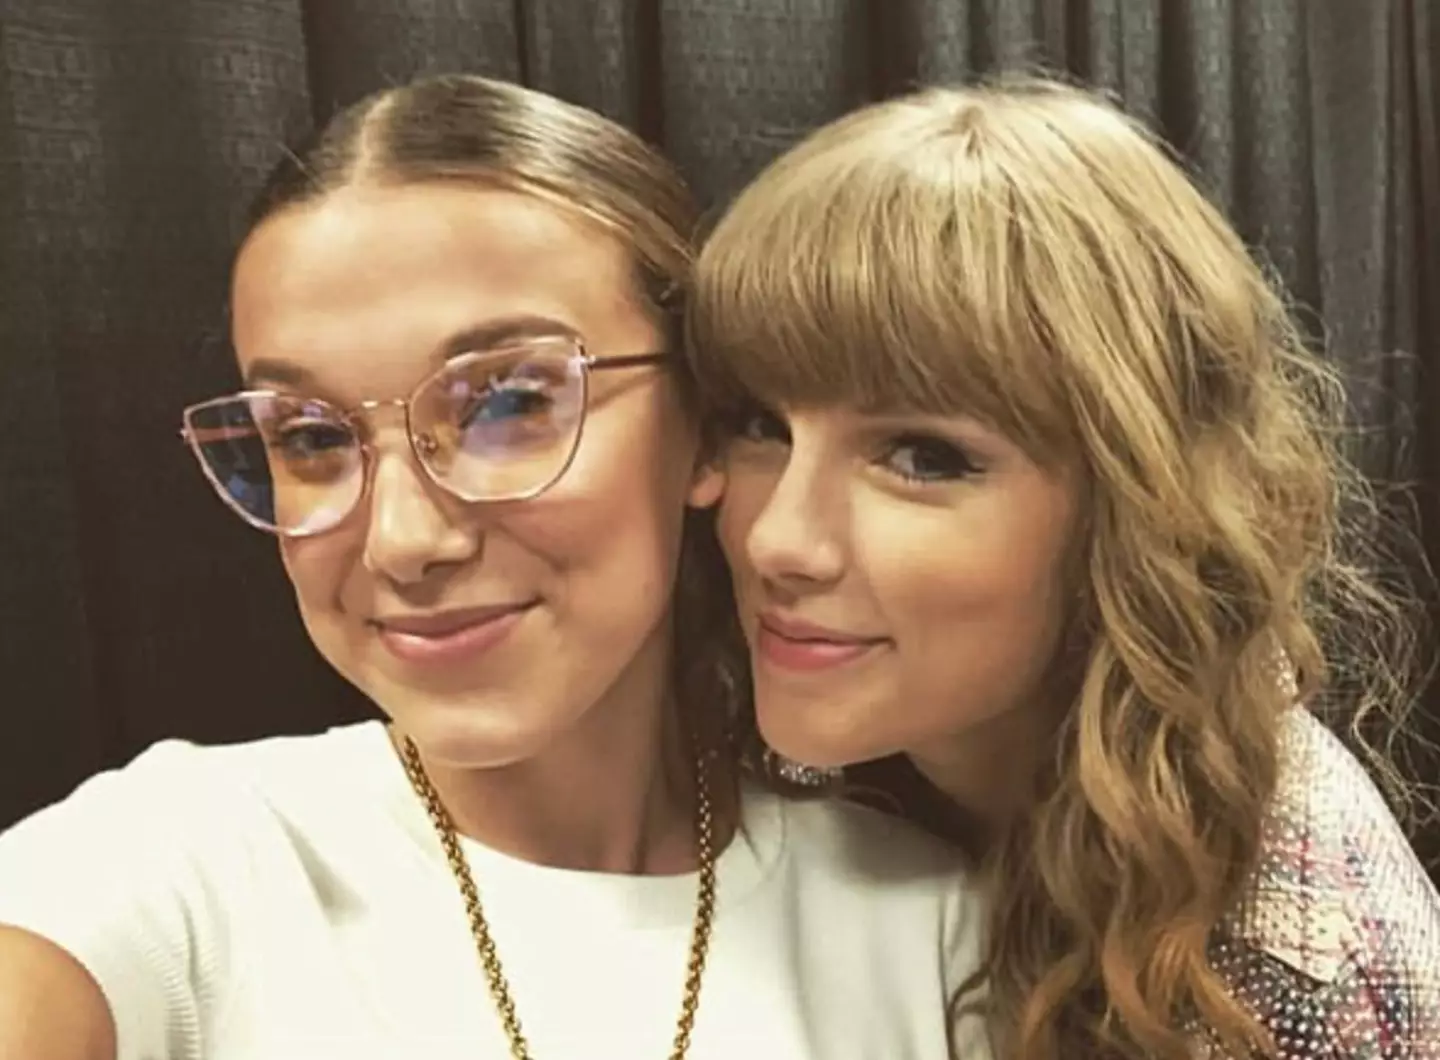 Taylor Swift and Millie Bobby Brown have posed for pictures together in the past.